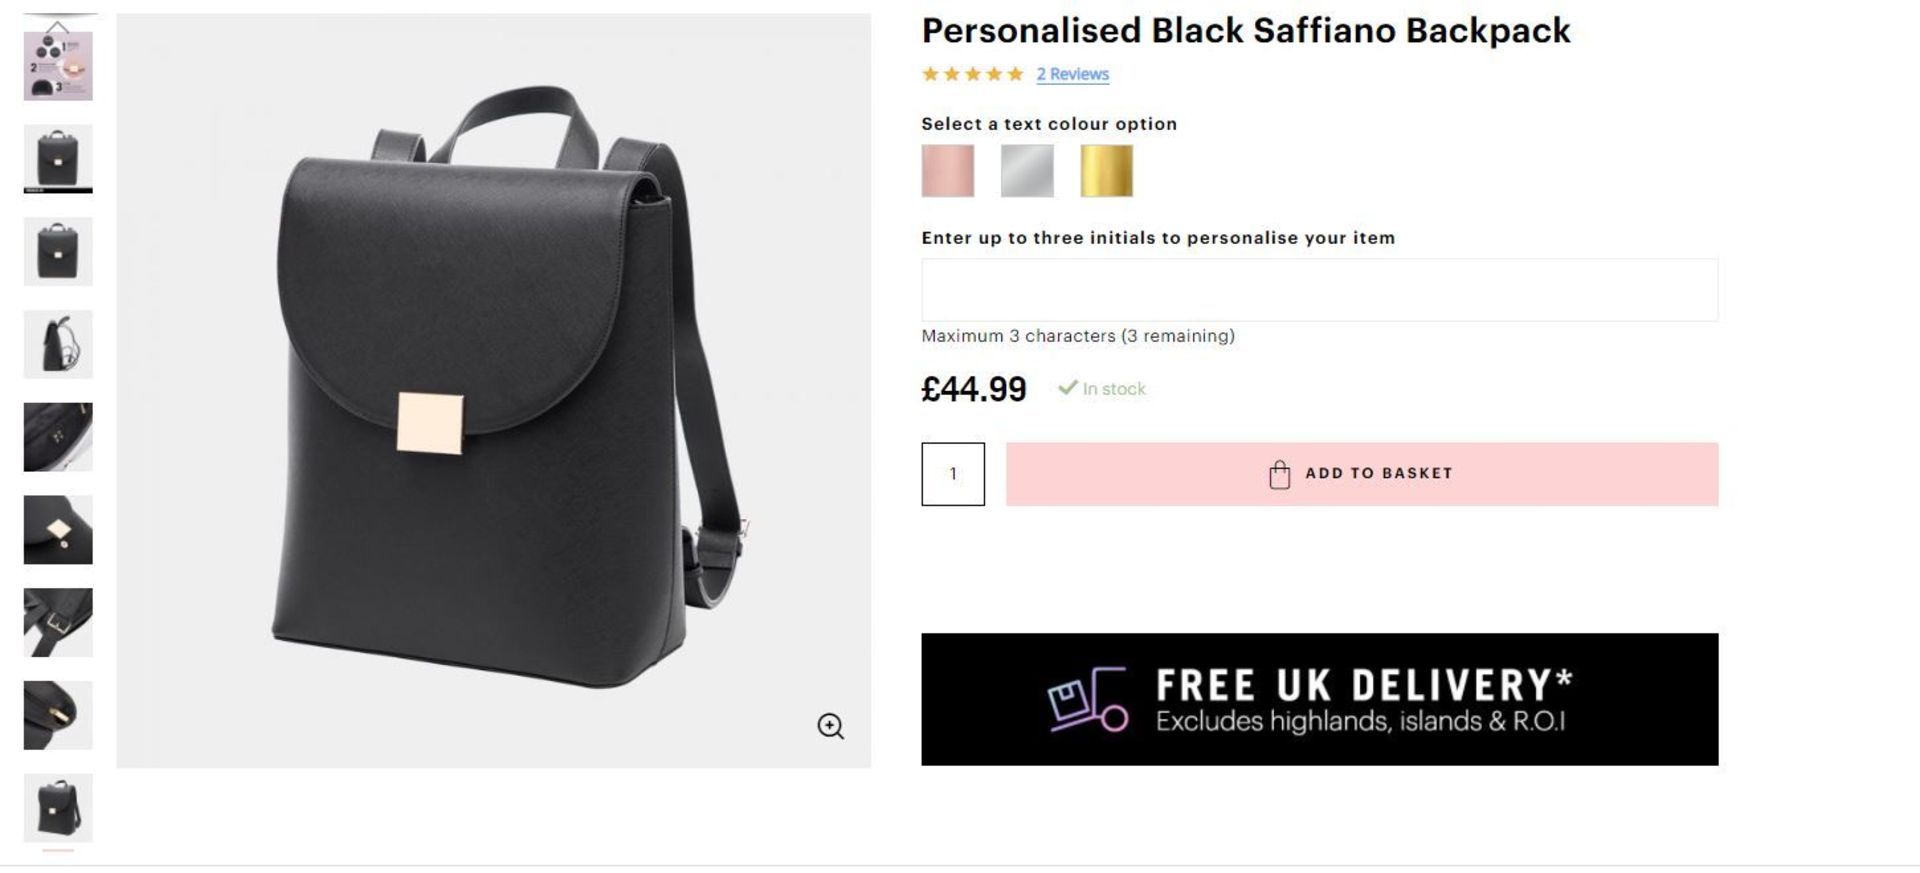 4 x NEW PACKAGED Beauti Saffiano Backpack - Black. RRP £49.99 each. Note: Item is not personalised.